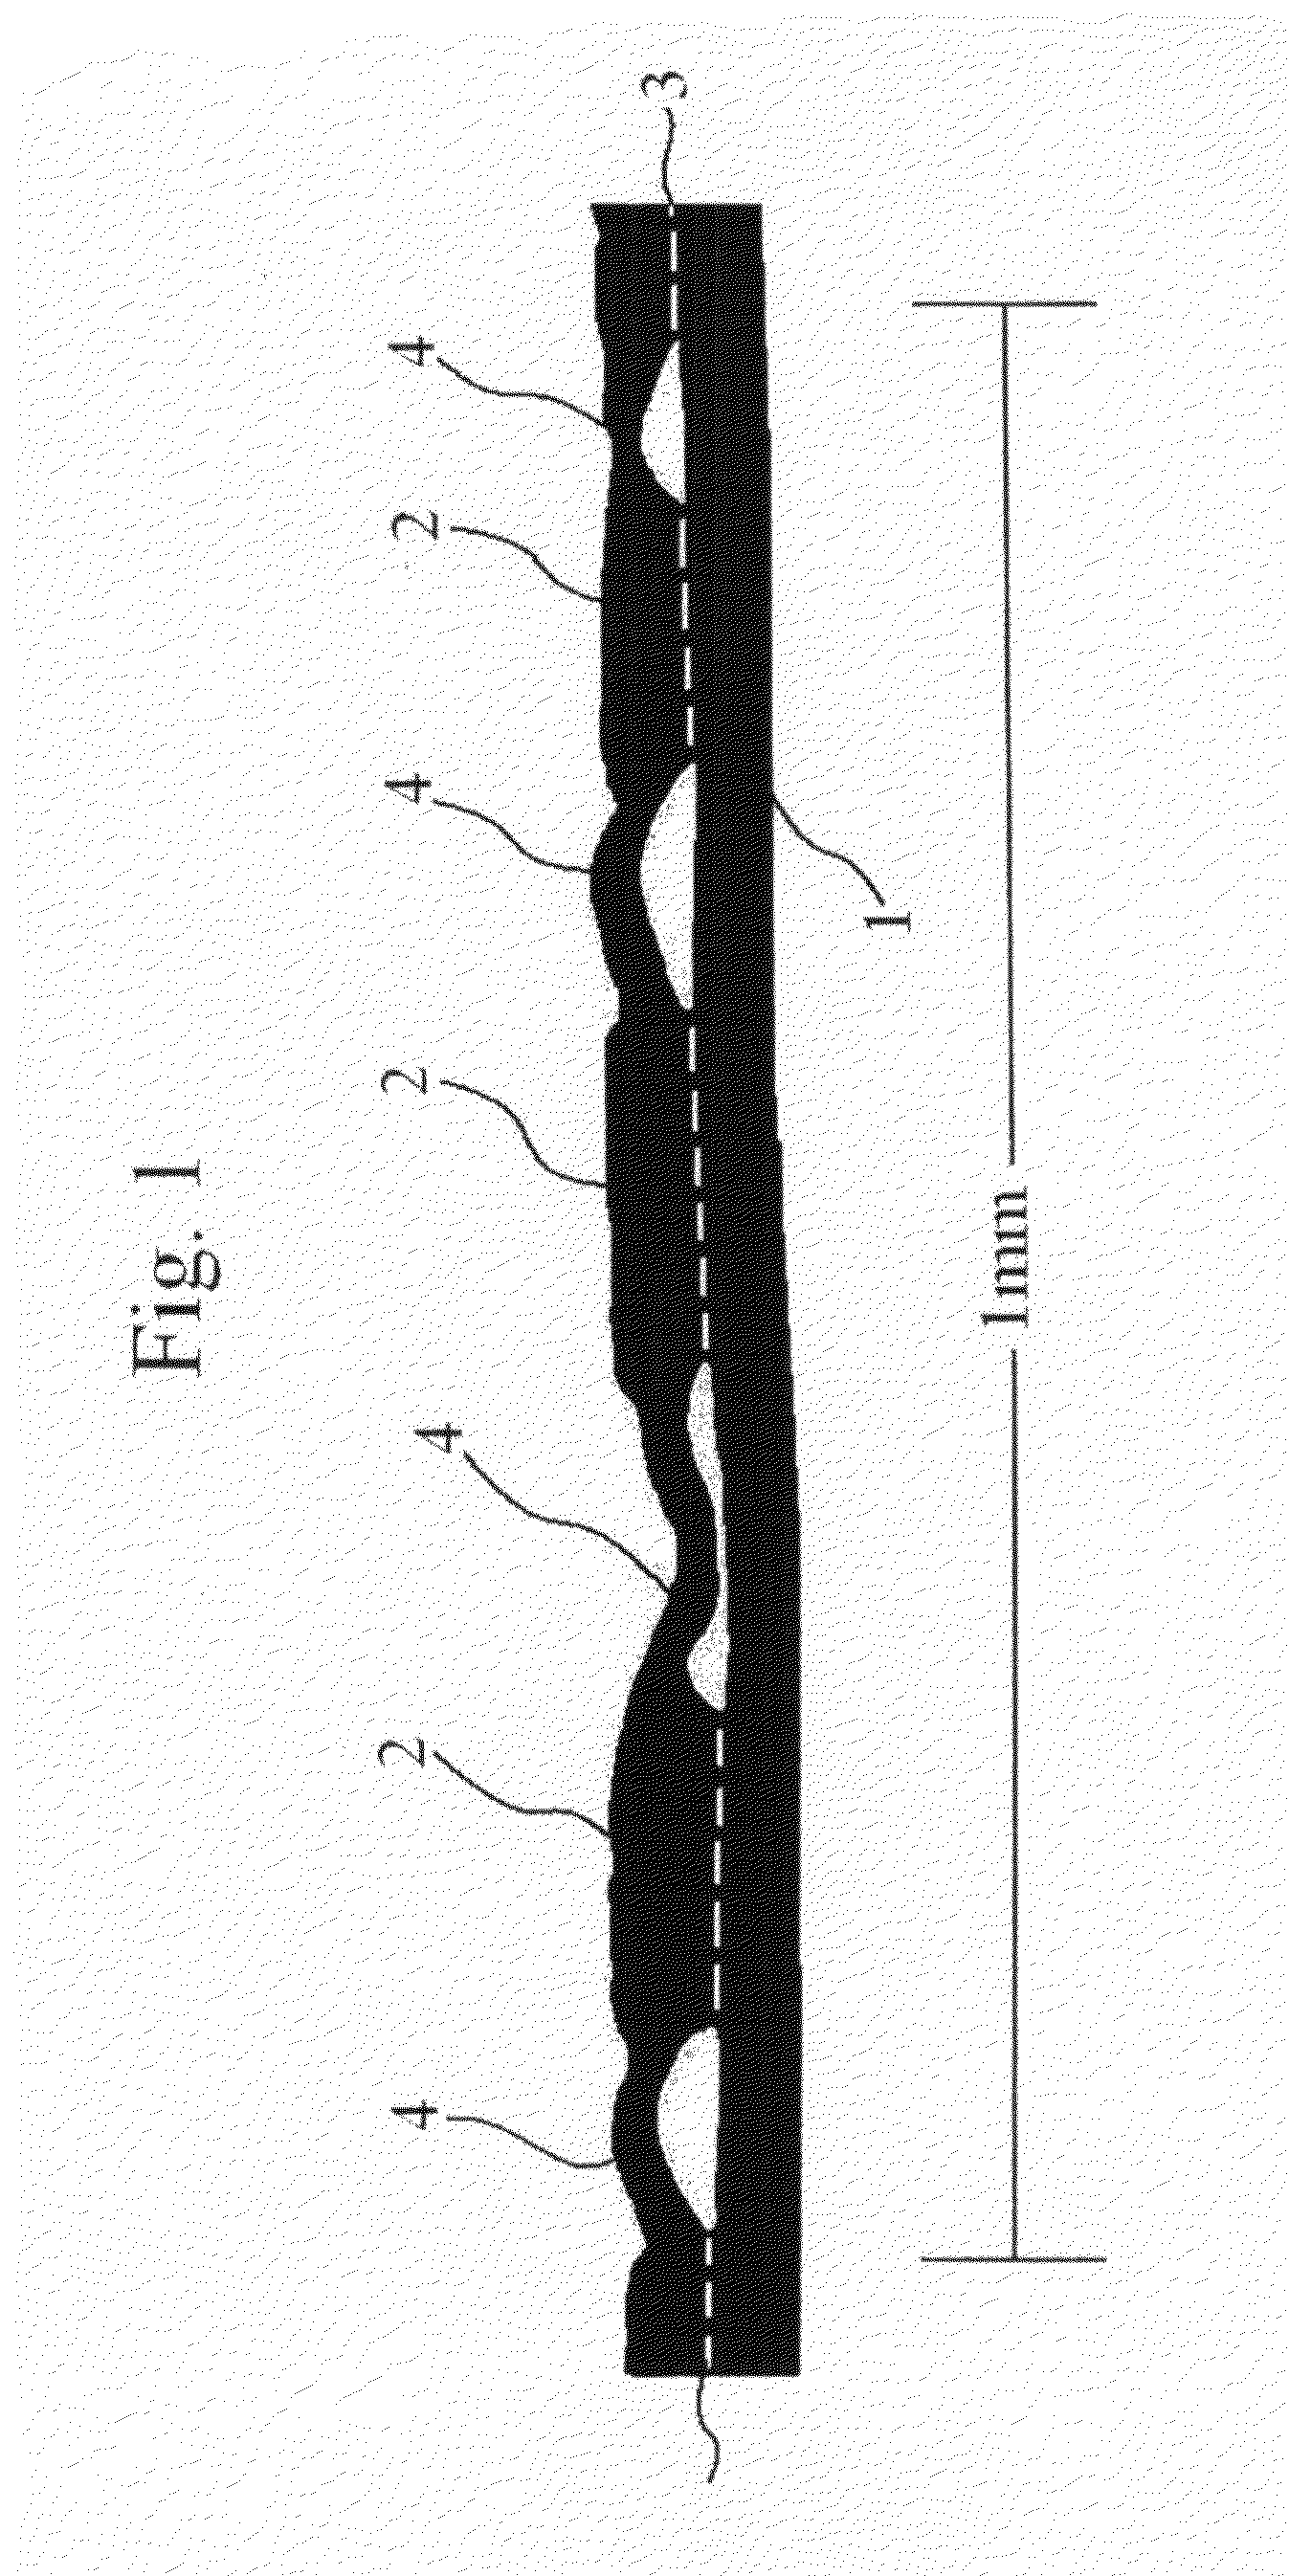 Crosslaminate of oriented films and methods and apparatus for manufacturing same